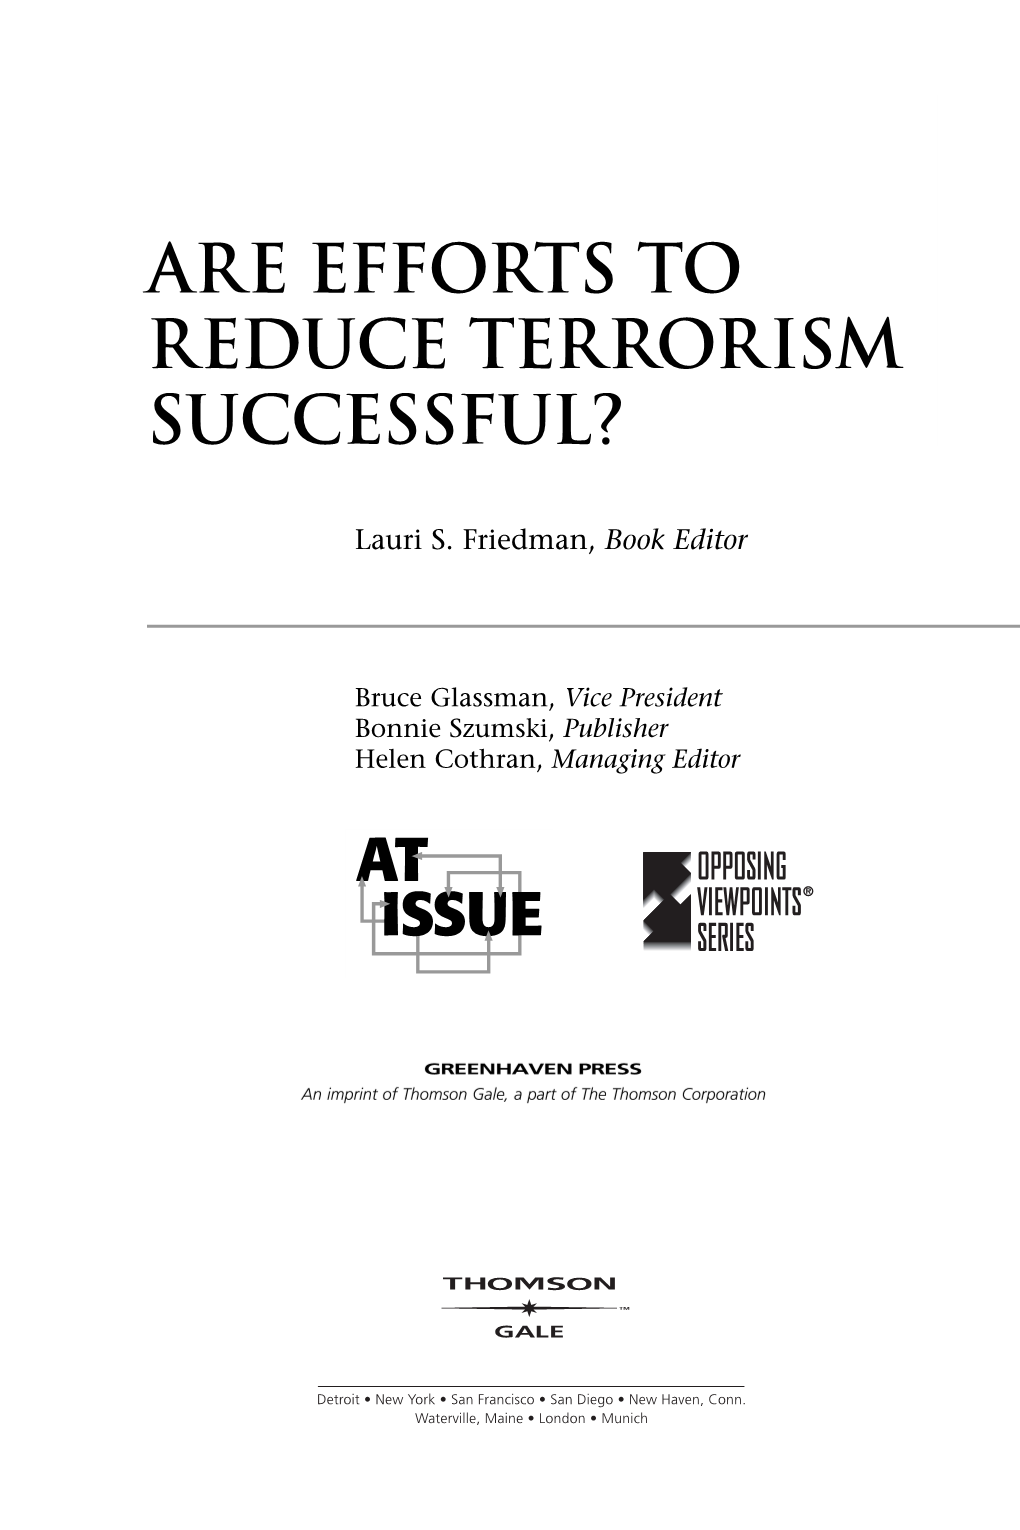 Are Efforts to Reduce Terrorism Successful?